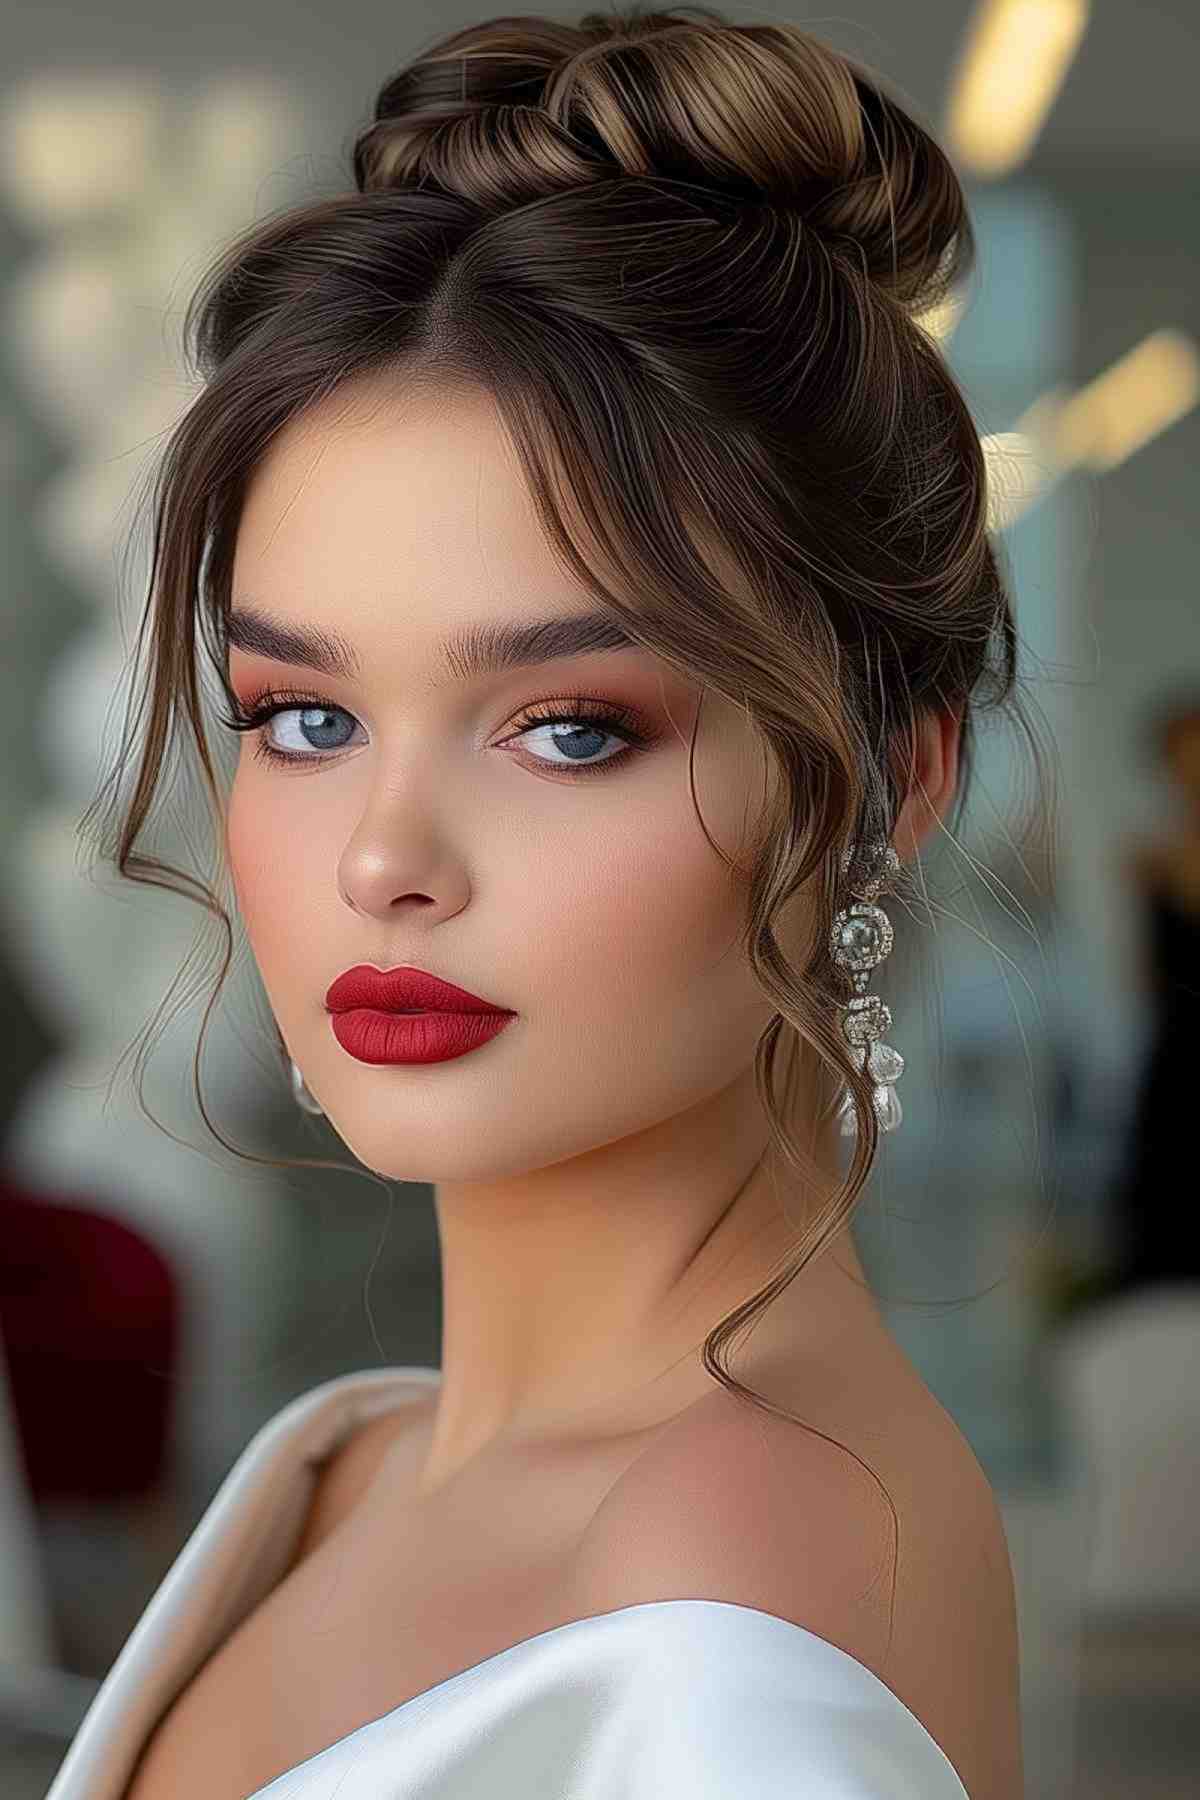 Young woman with a romantic textured chignon hairstyle with loose strands framing the face